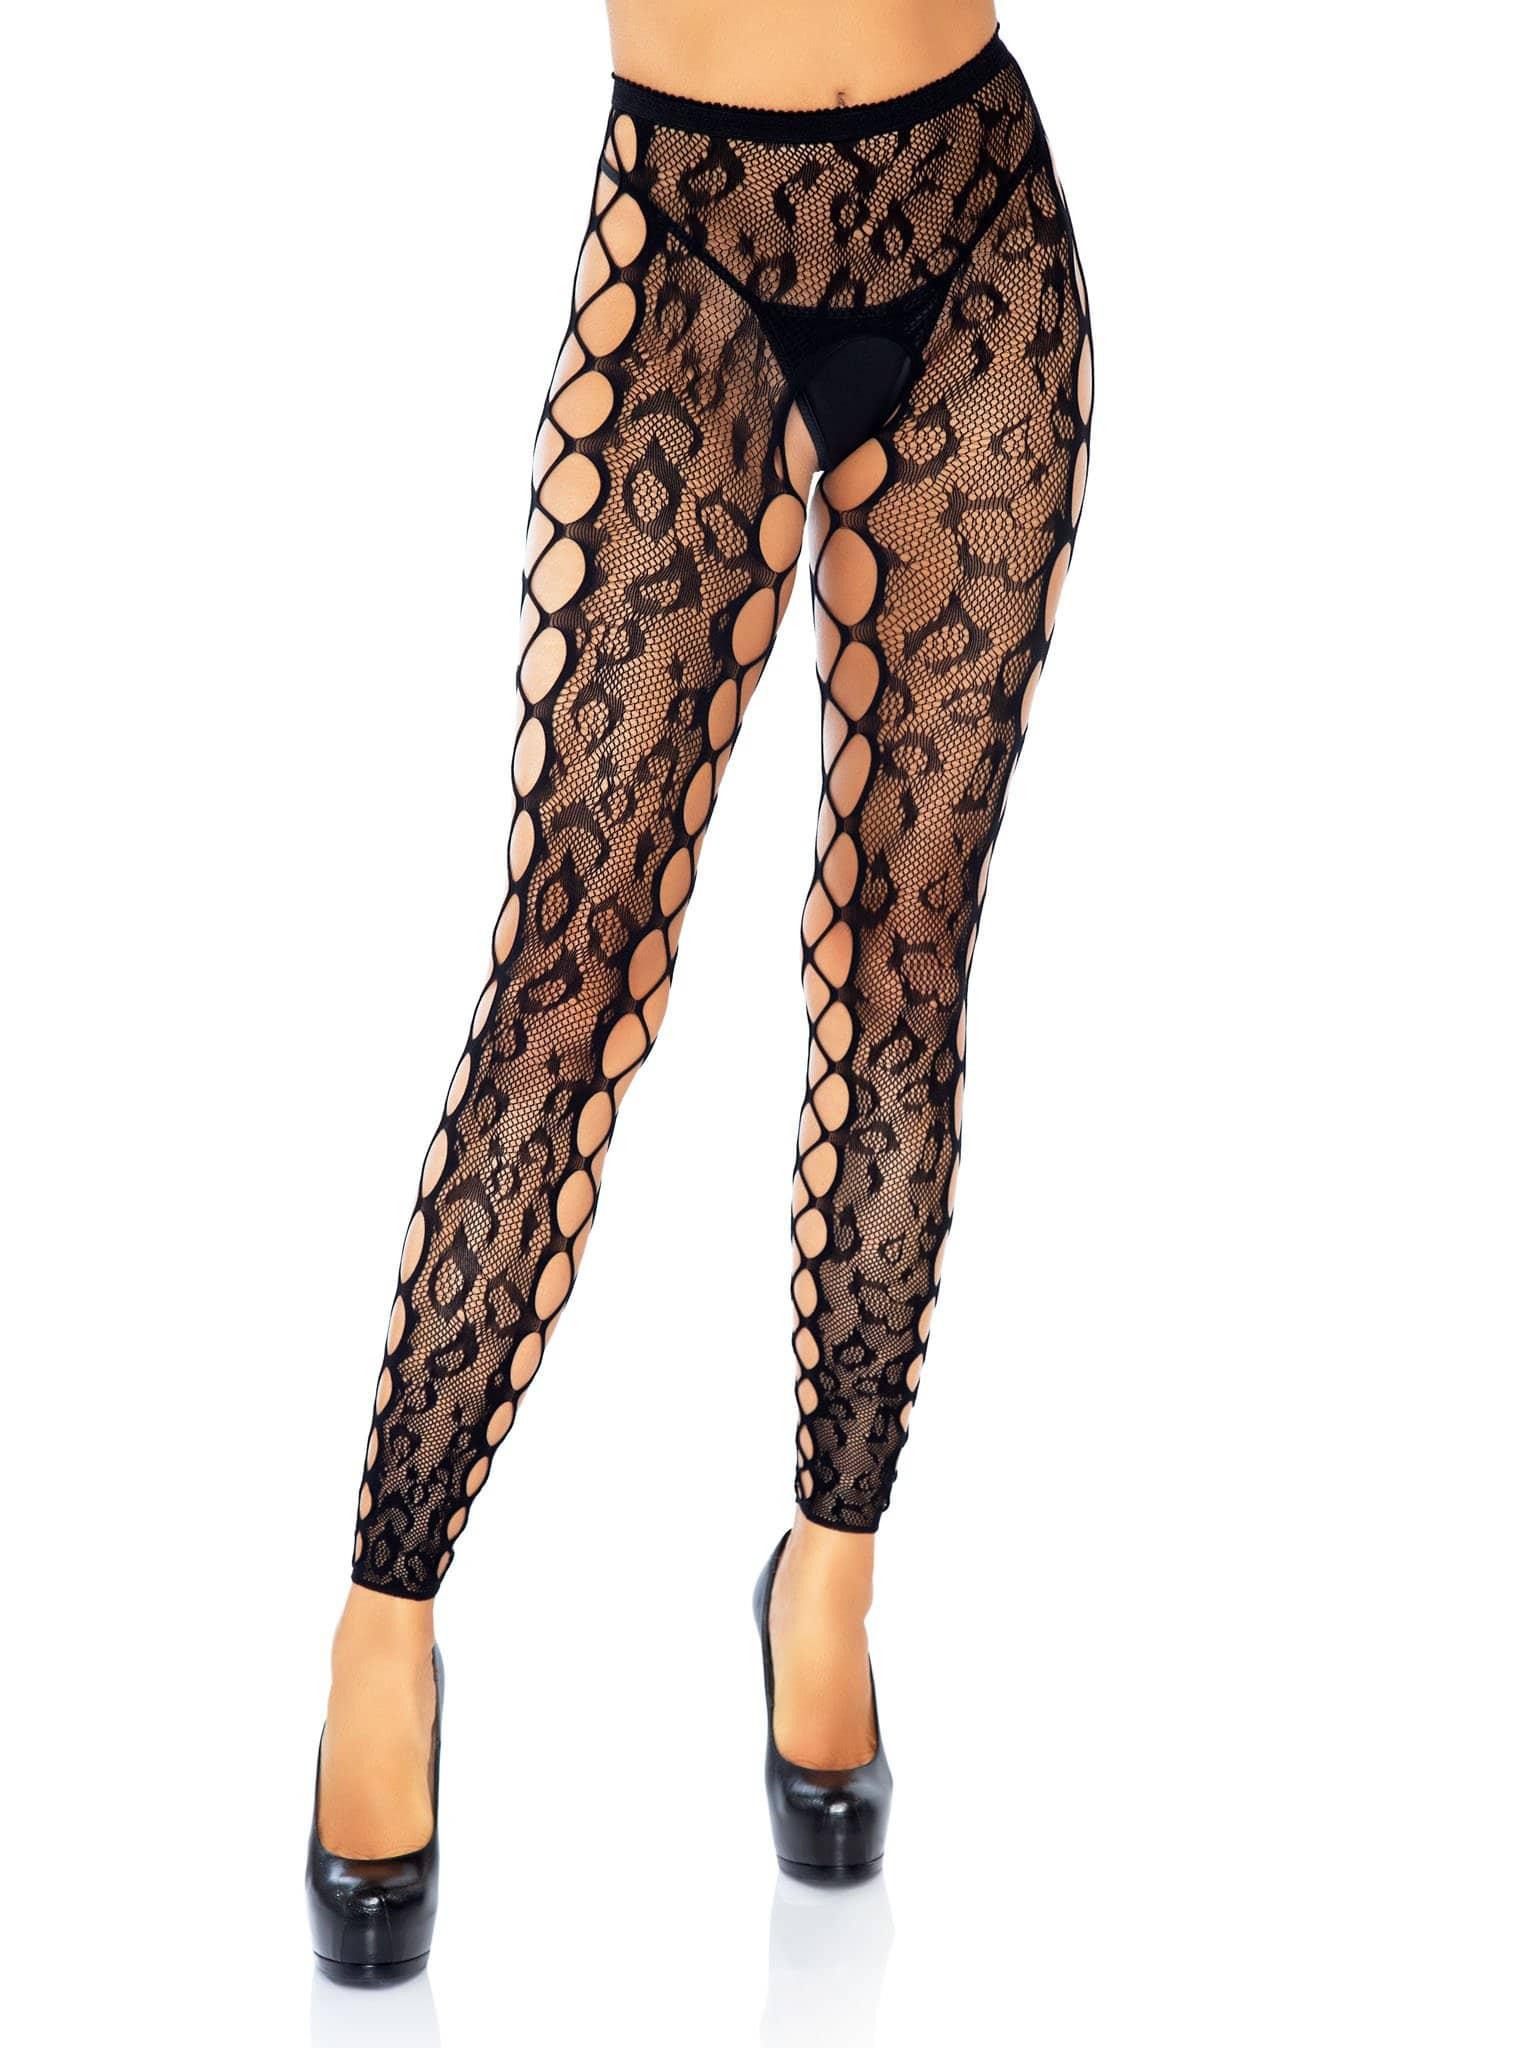 Footless Leopard Lace Crotchless Tights - Black - My Sex Toy Hub